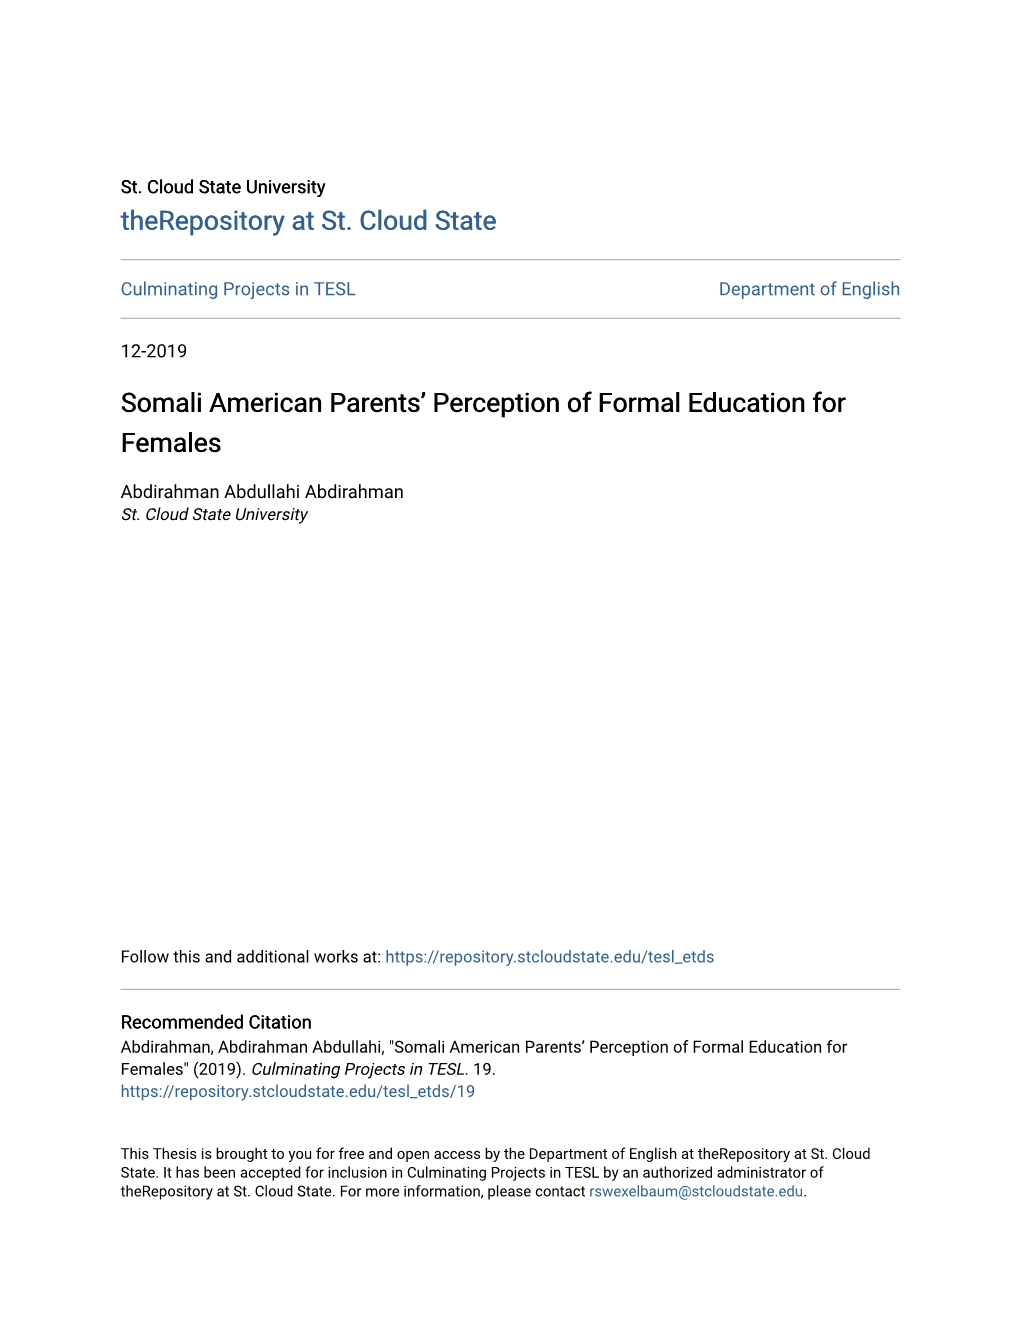 Somali American Parents' Perception of Formal Education for Females